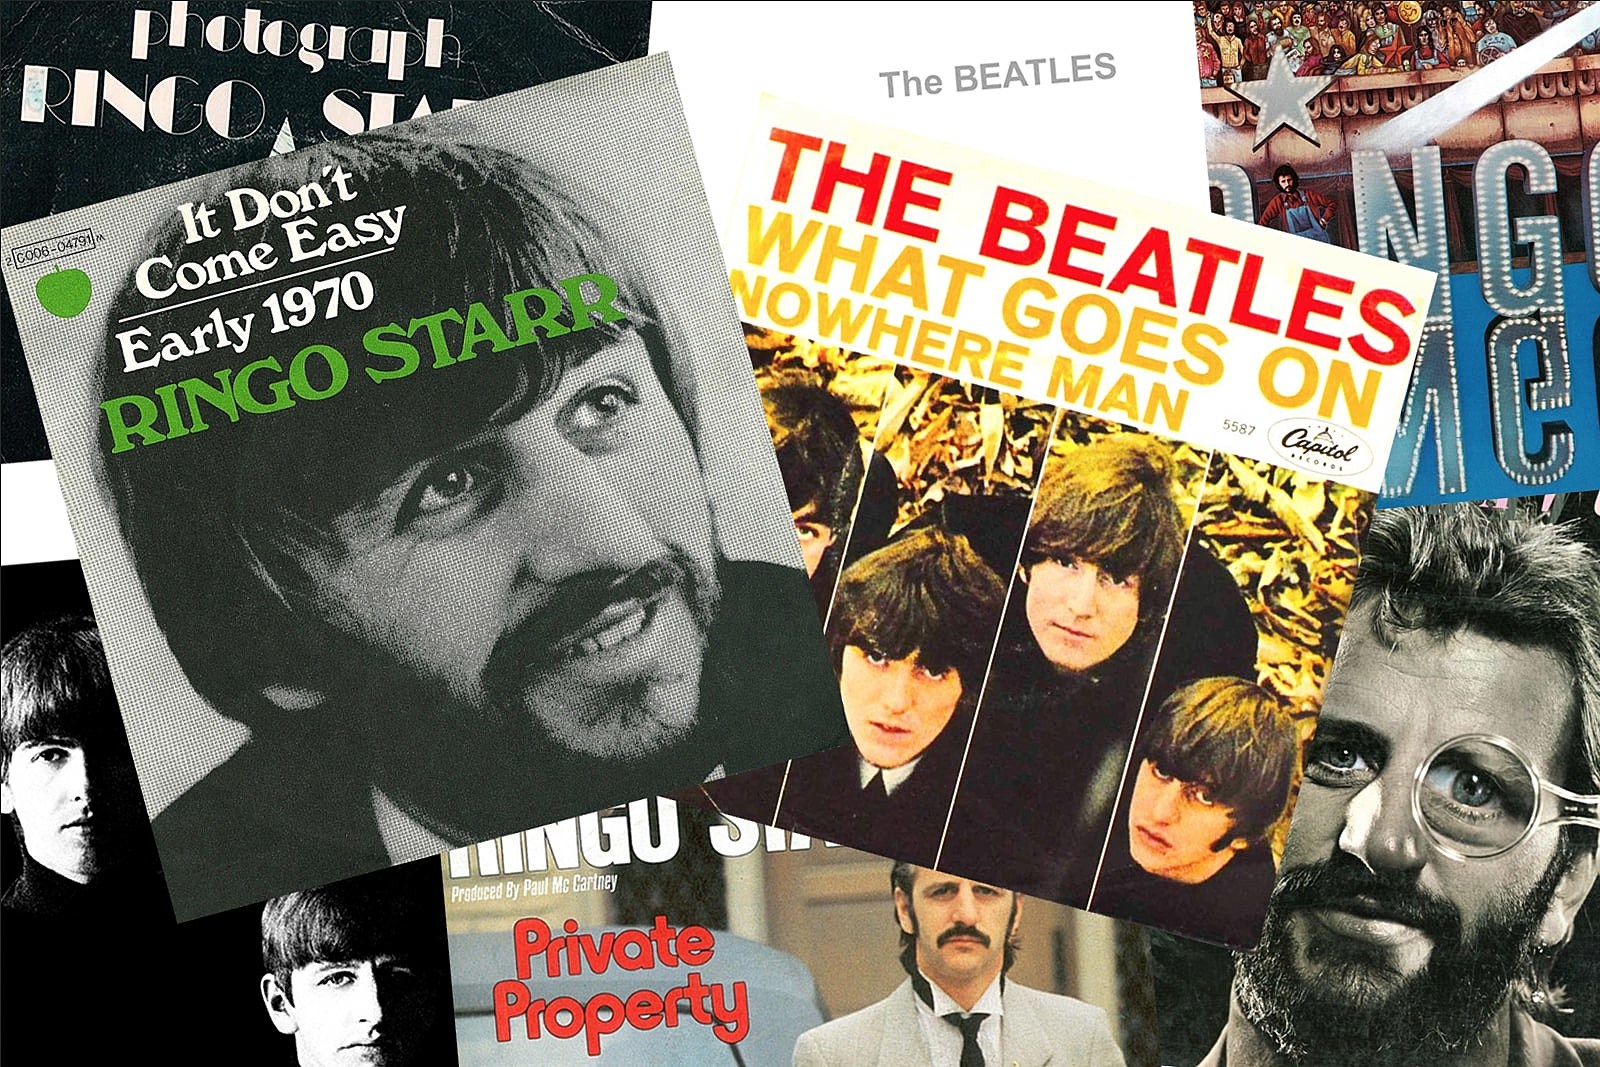 Top 10 Ringo Starr Written the Other Beatles